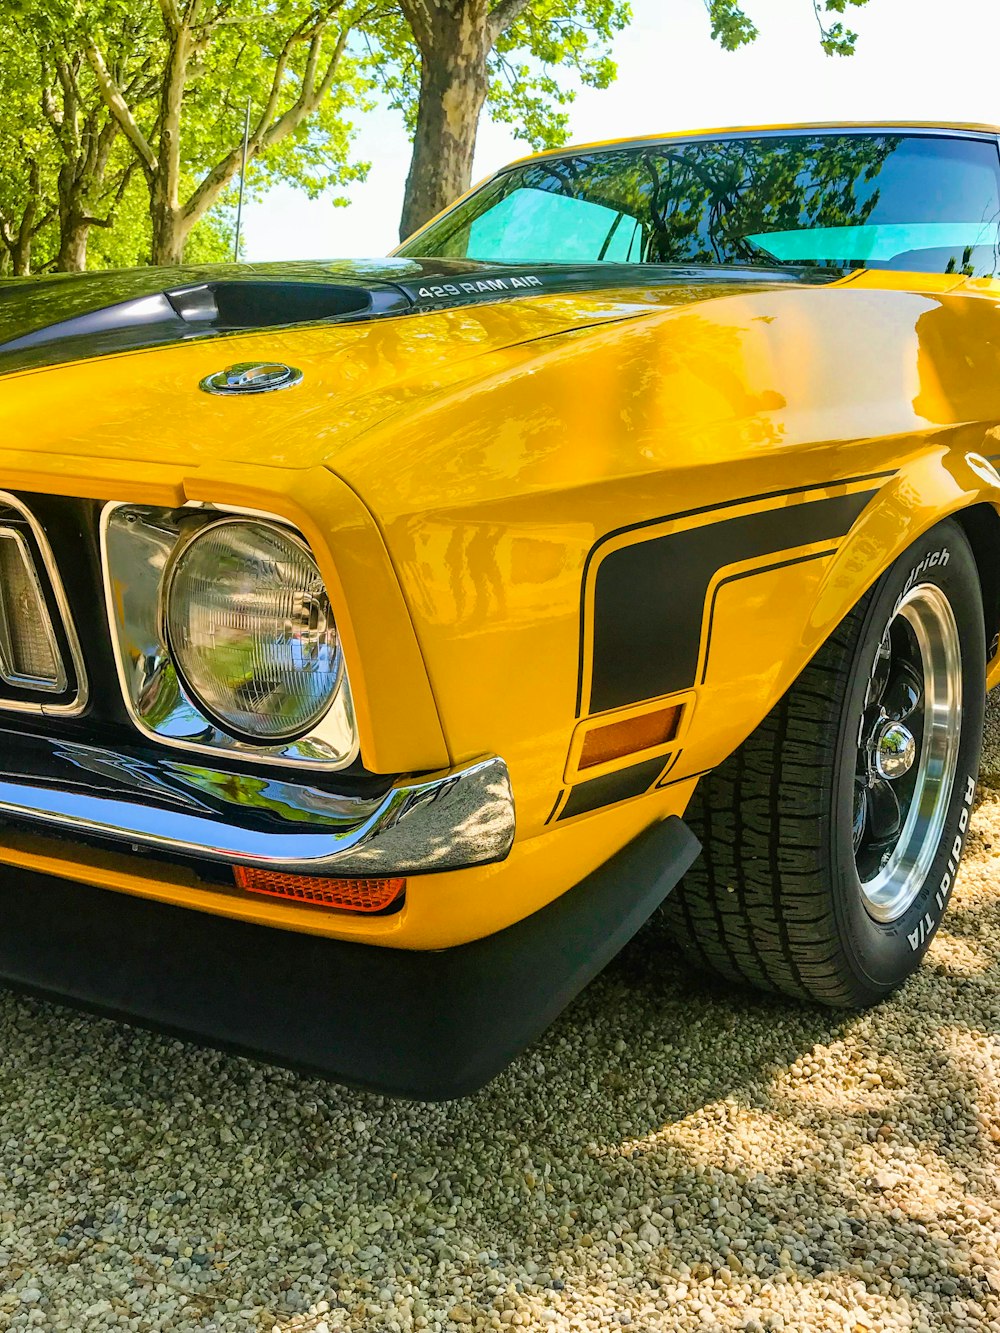 yellow muscle car